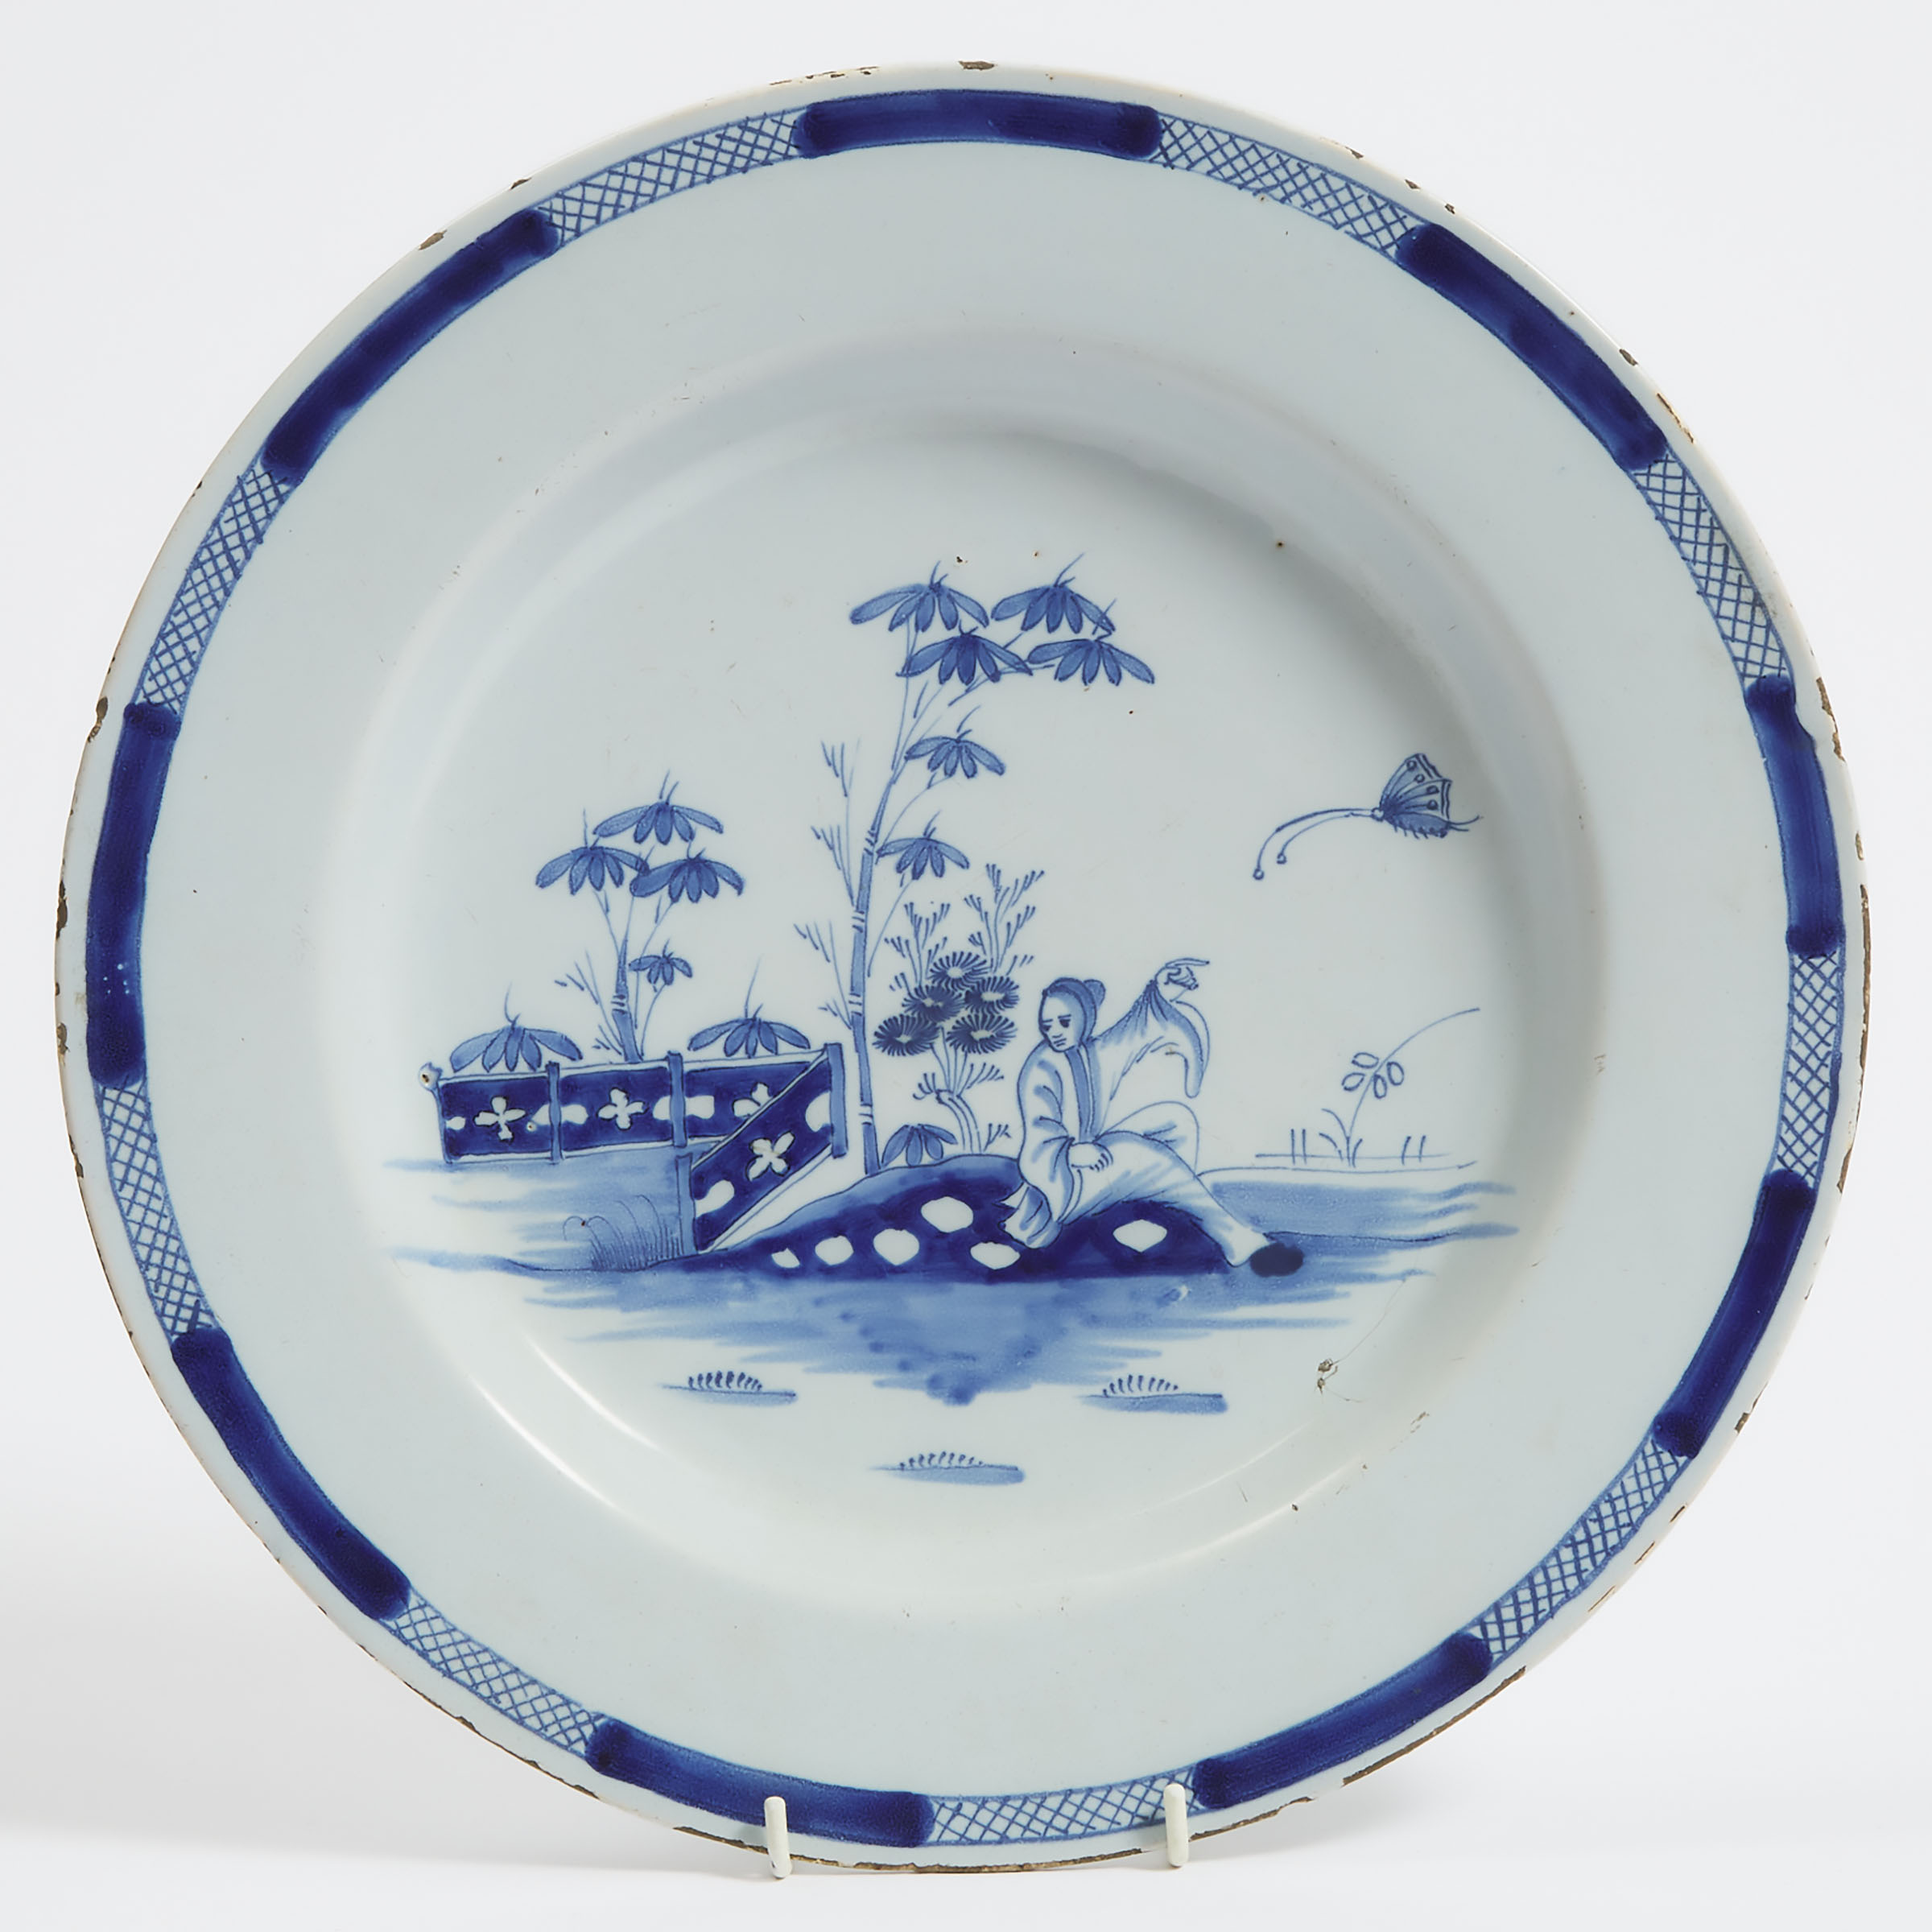 English Delft Blue and White Chinoiserie Charger, mid 18th century